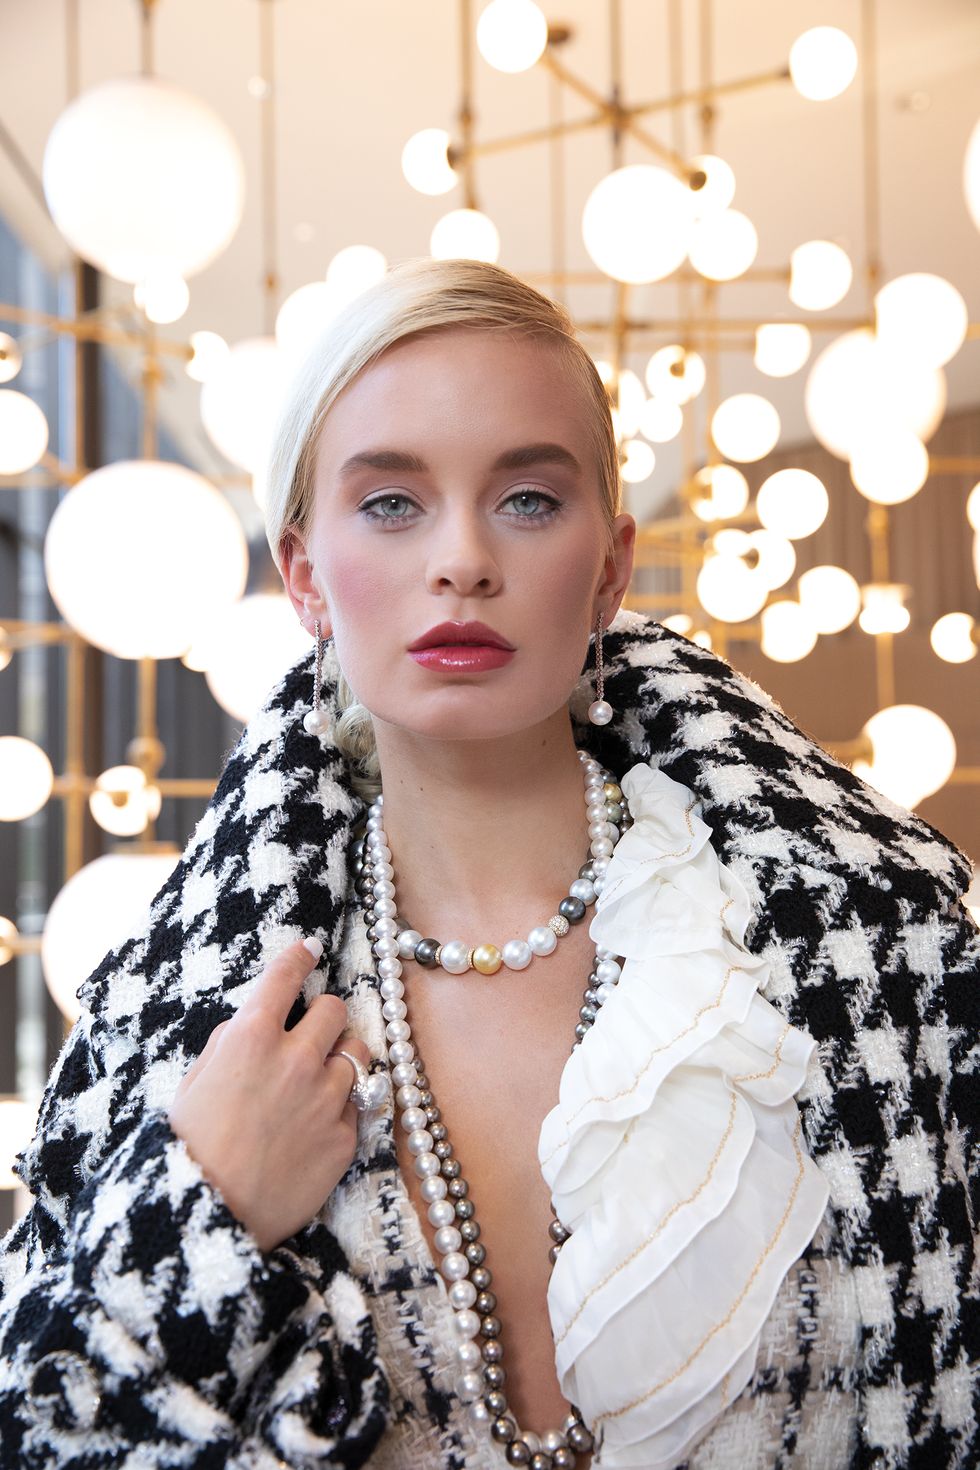 Crepe scarf, $2,350, tweed jacket, $5,400, and coat, $9,200, all by Chanel; pearl earrings, $18,000, ring, $9,800, and necklaces, from $16,500, all by Mikimoto at Zadok Jewelers.